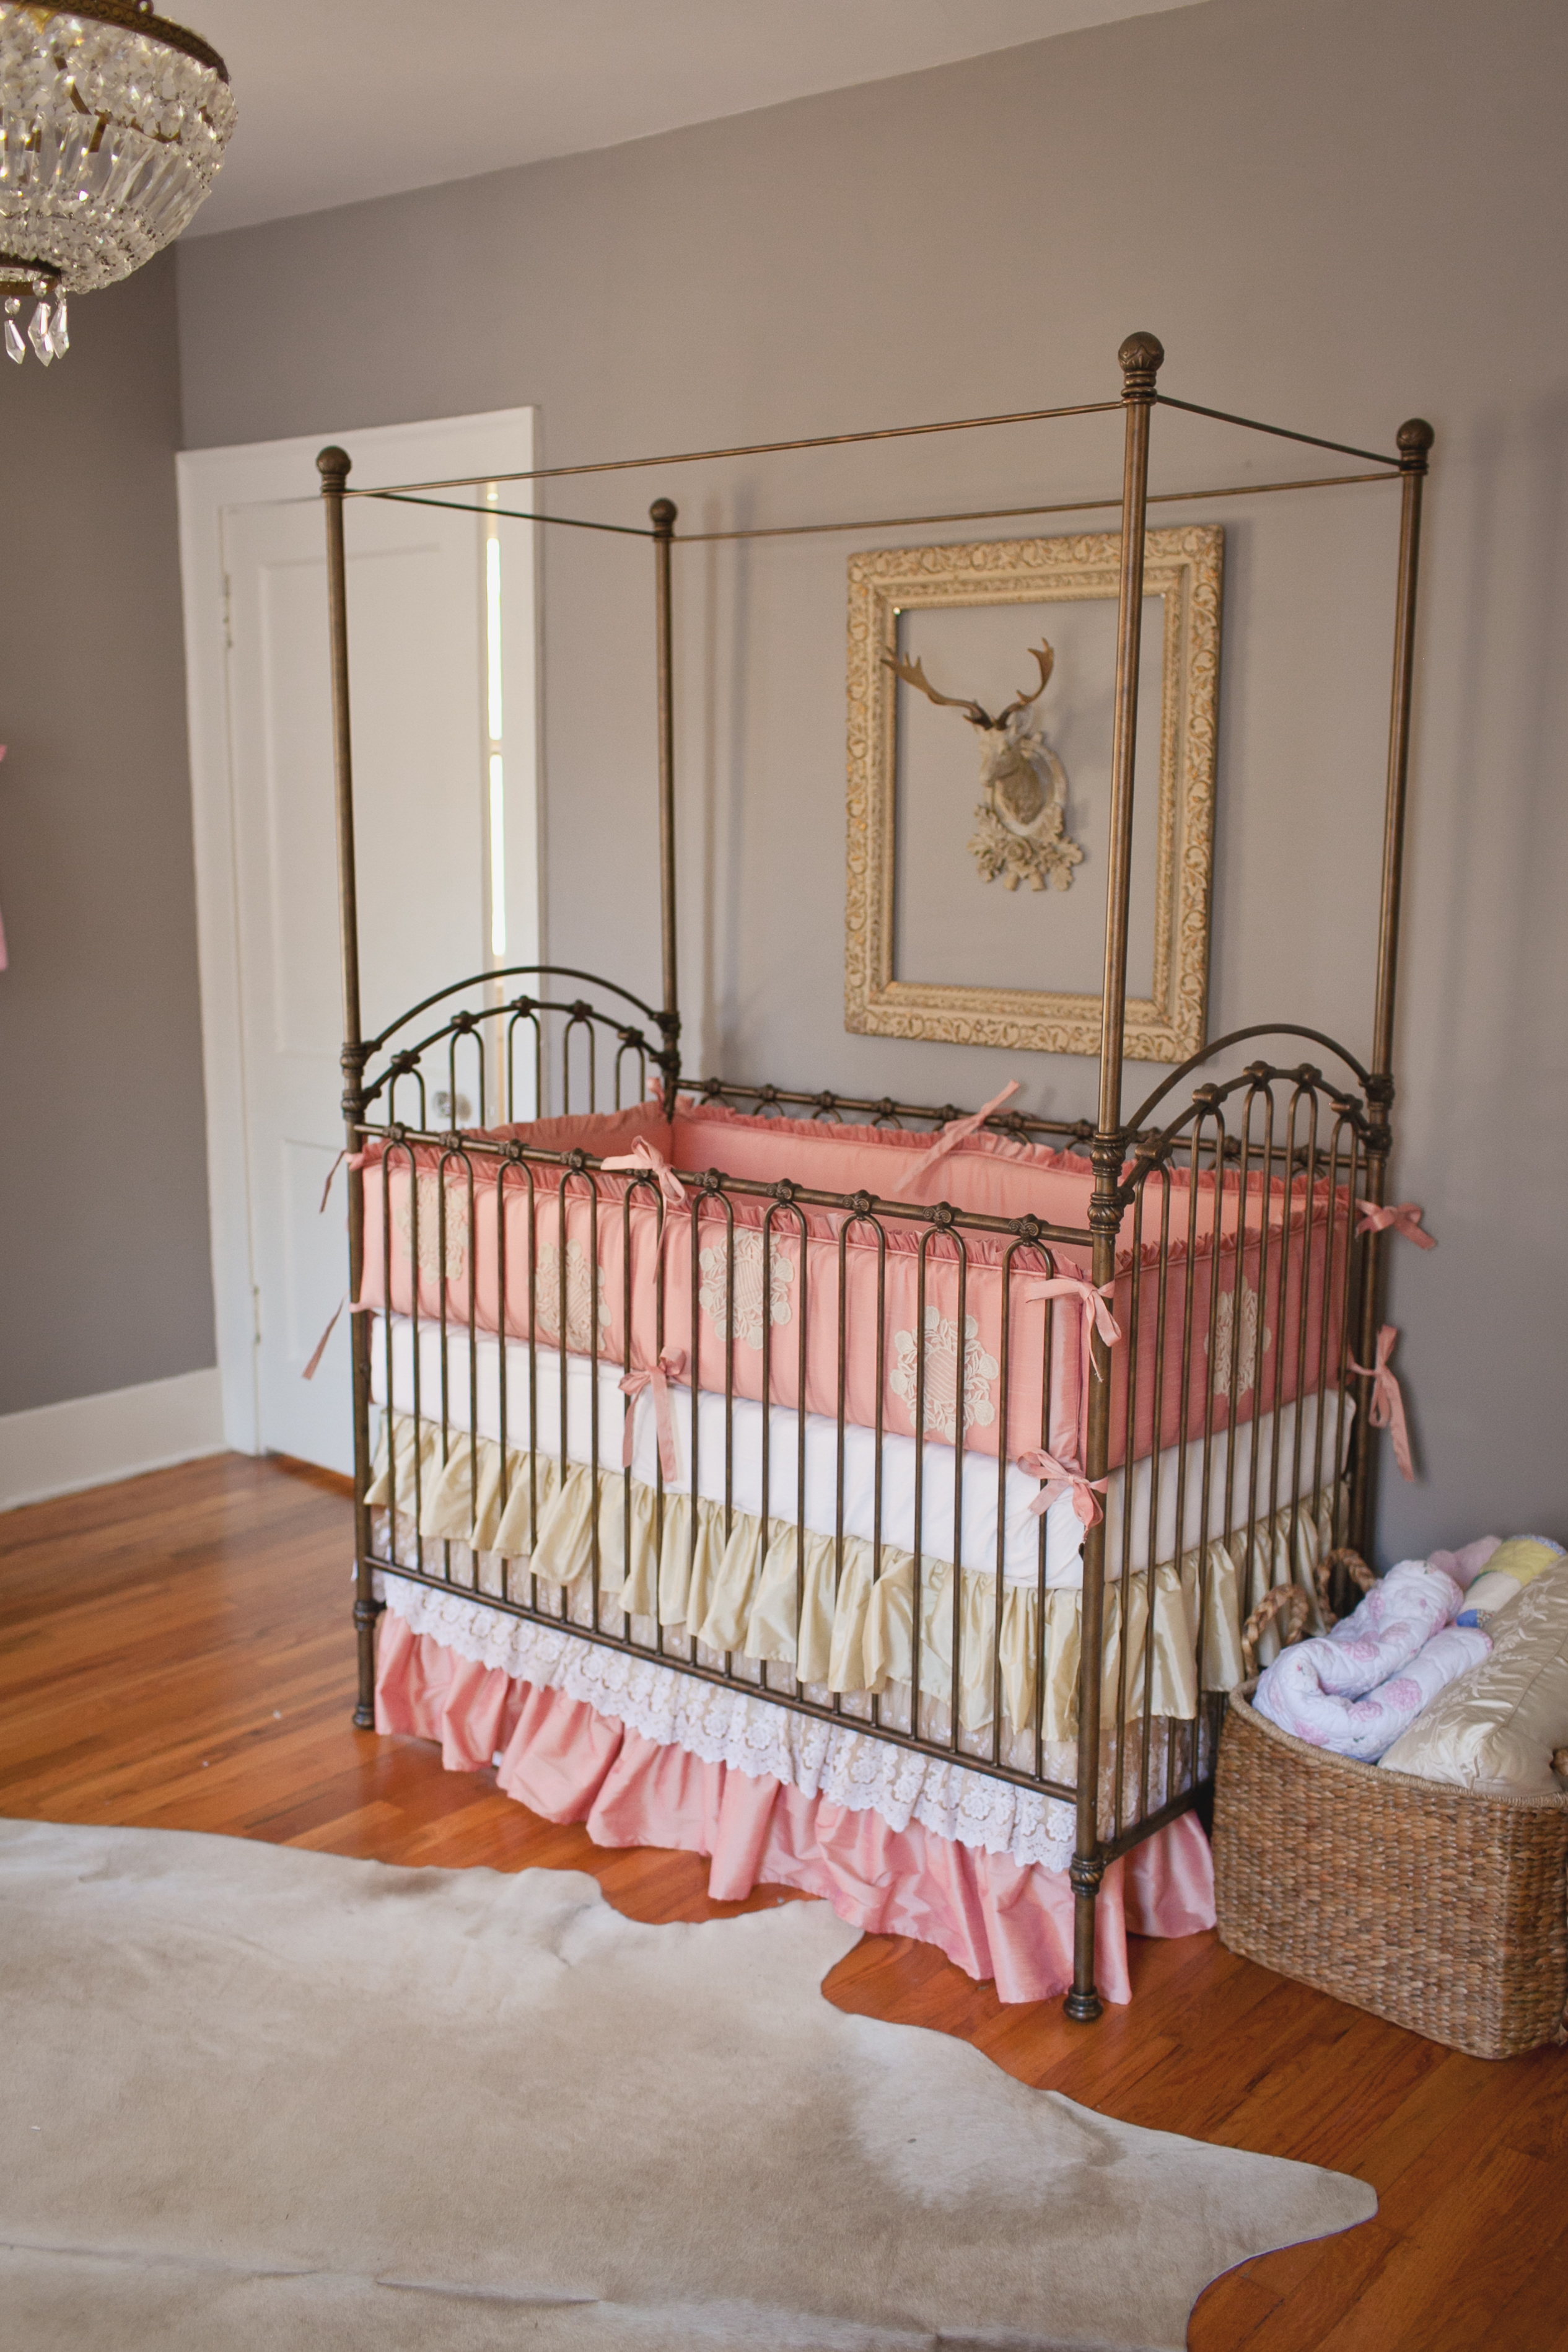 Custom Crib Bedding featuring Lace Pulled from an Antique Wedding Dress